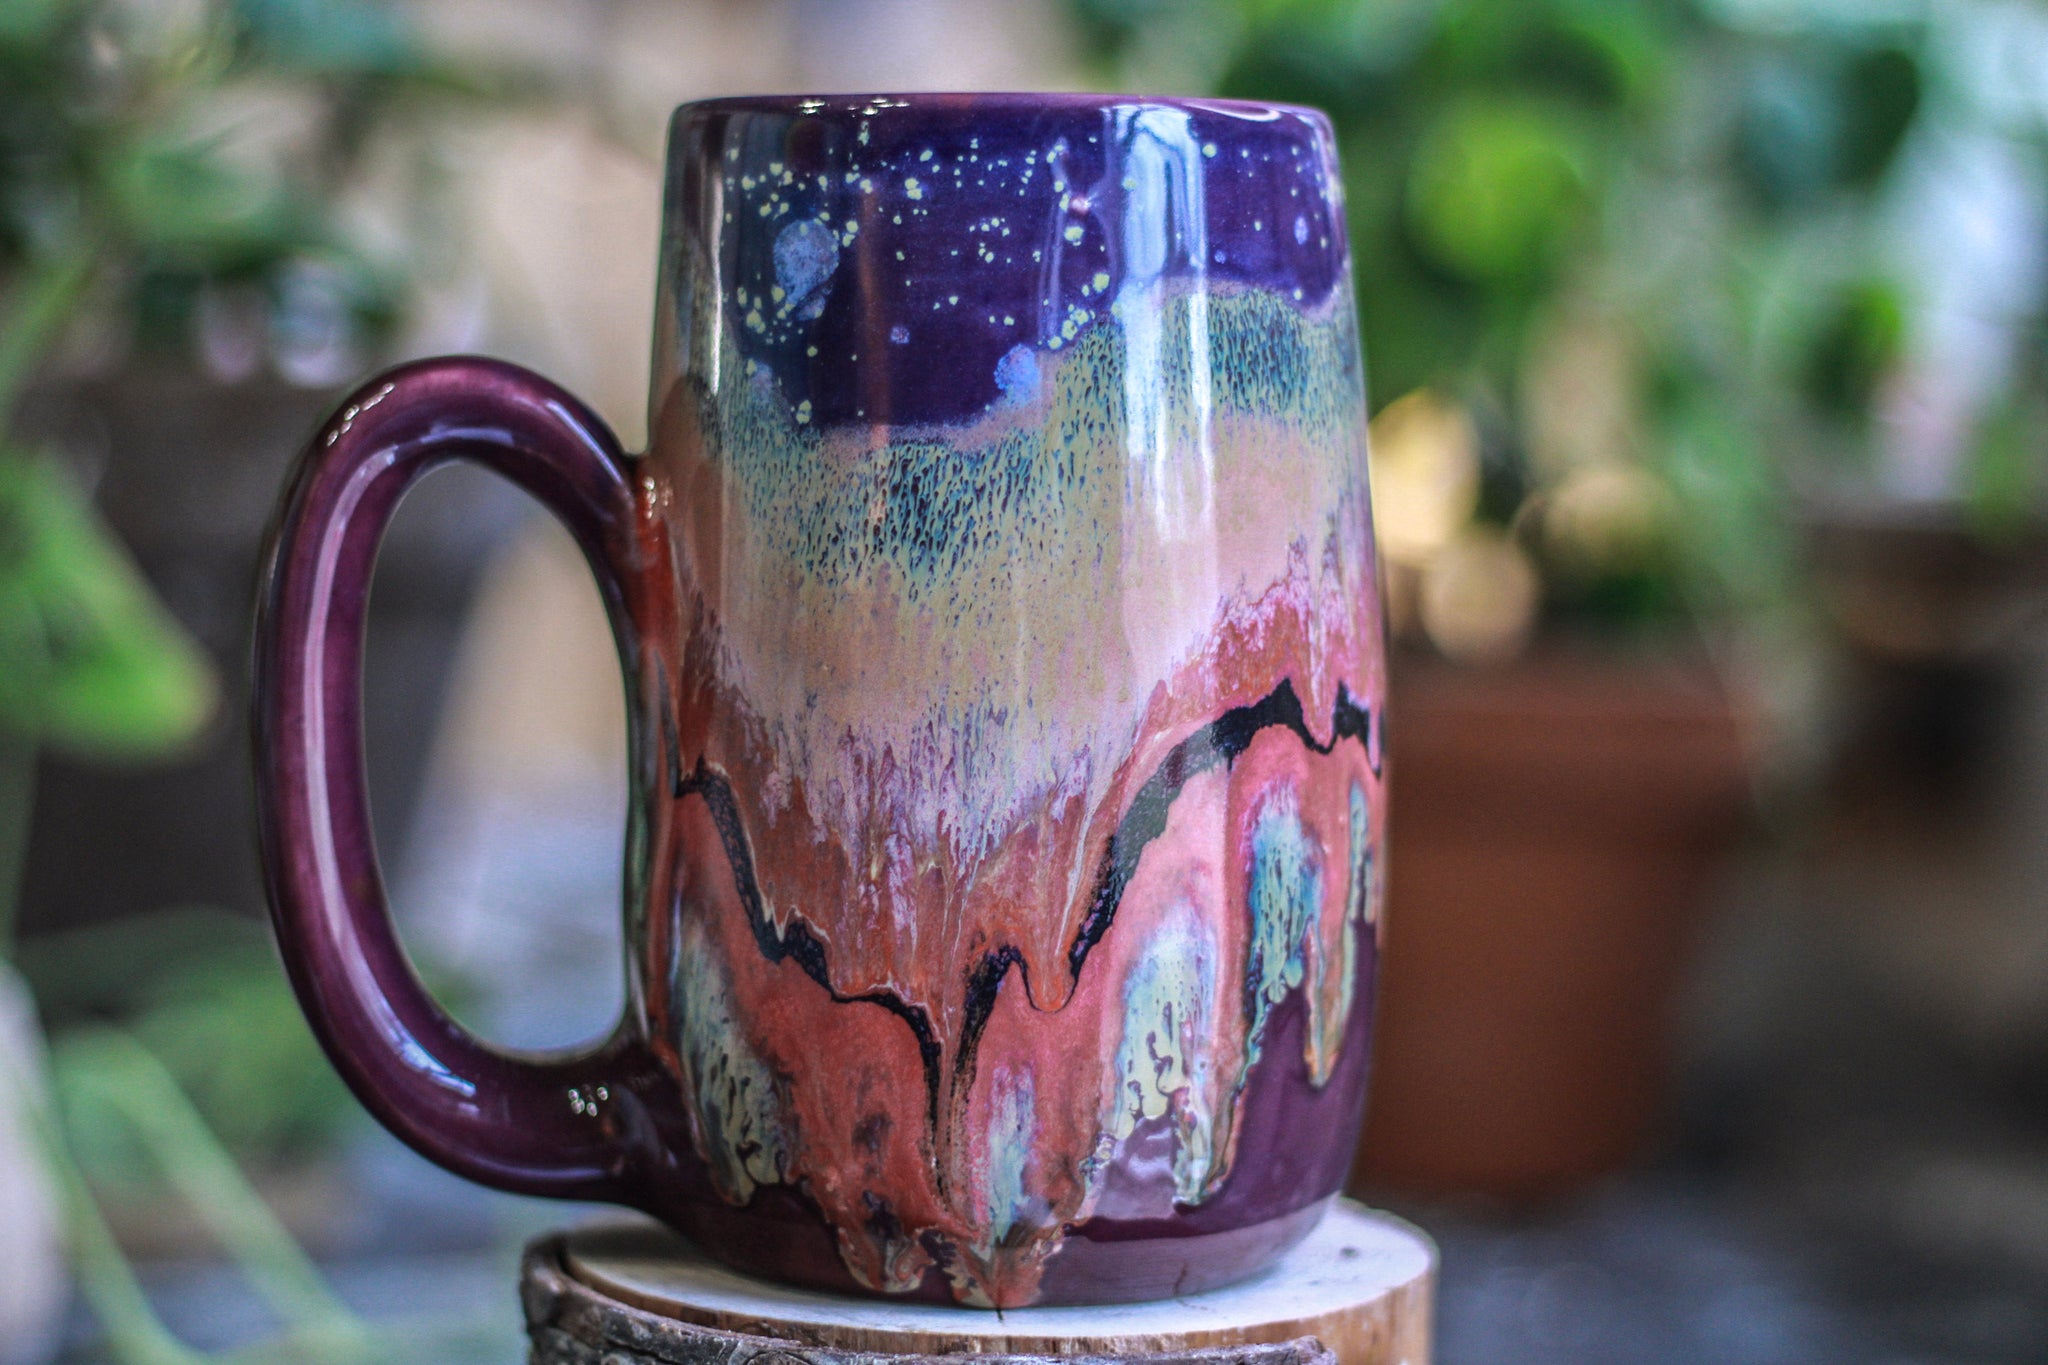 His Mercies are New Purple Ceramic Coffee Mug with Exposed Clay